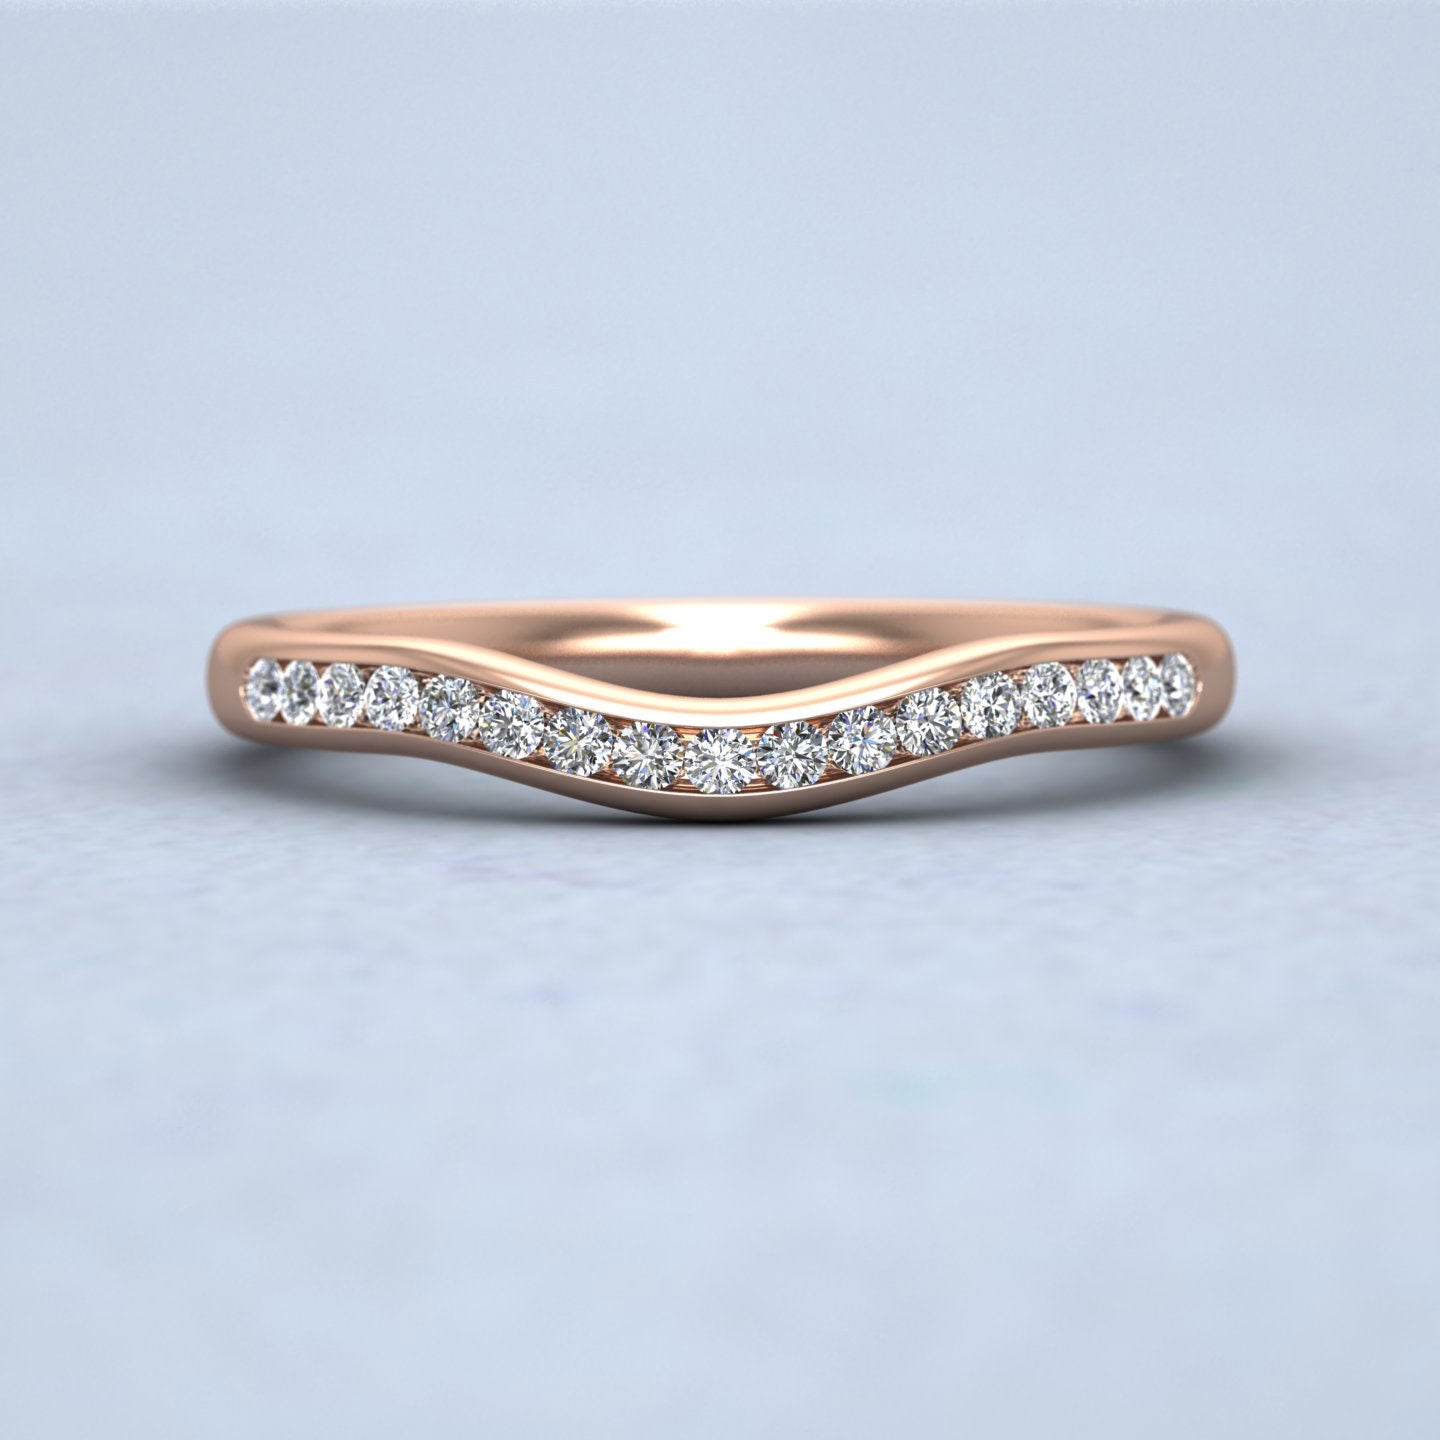 Curved To Fit Channel Set Diamond Wedding Ring In 18ct Rose Gold 2.25mm Wide